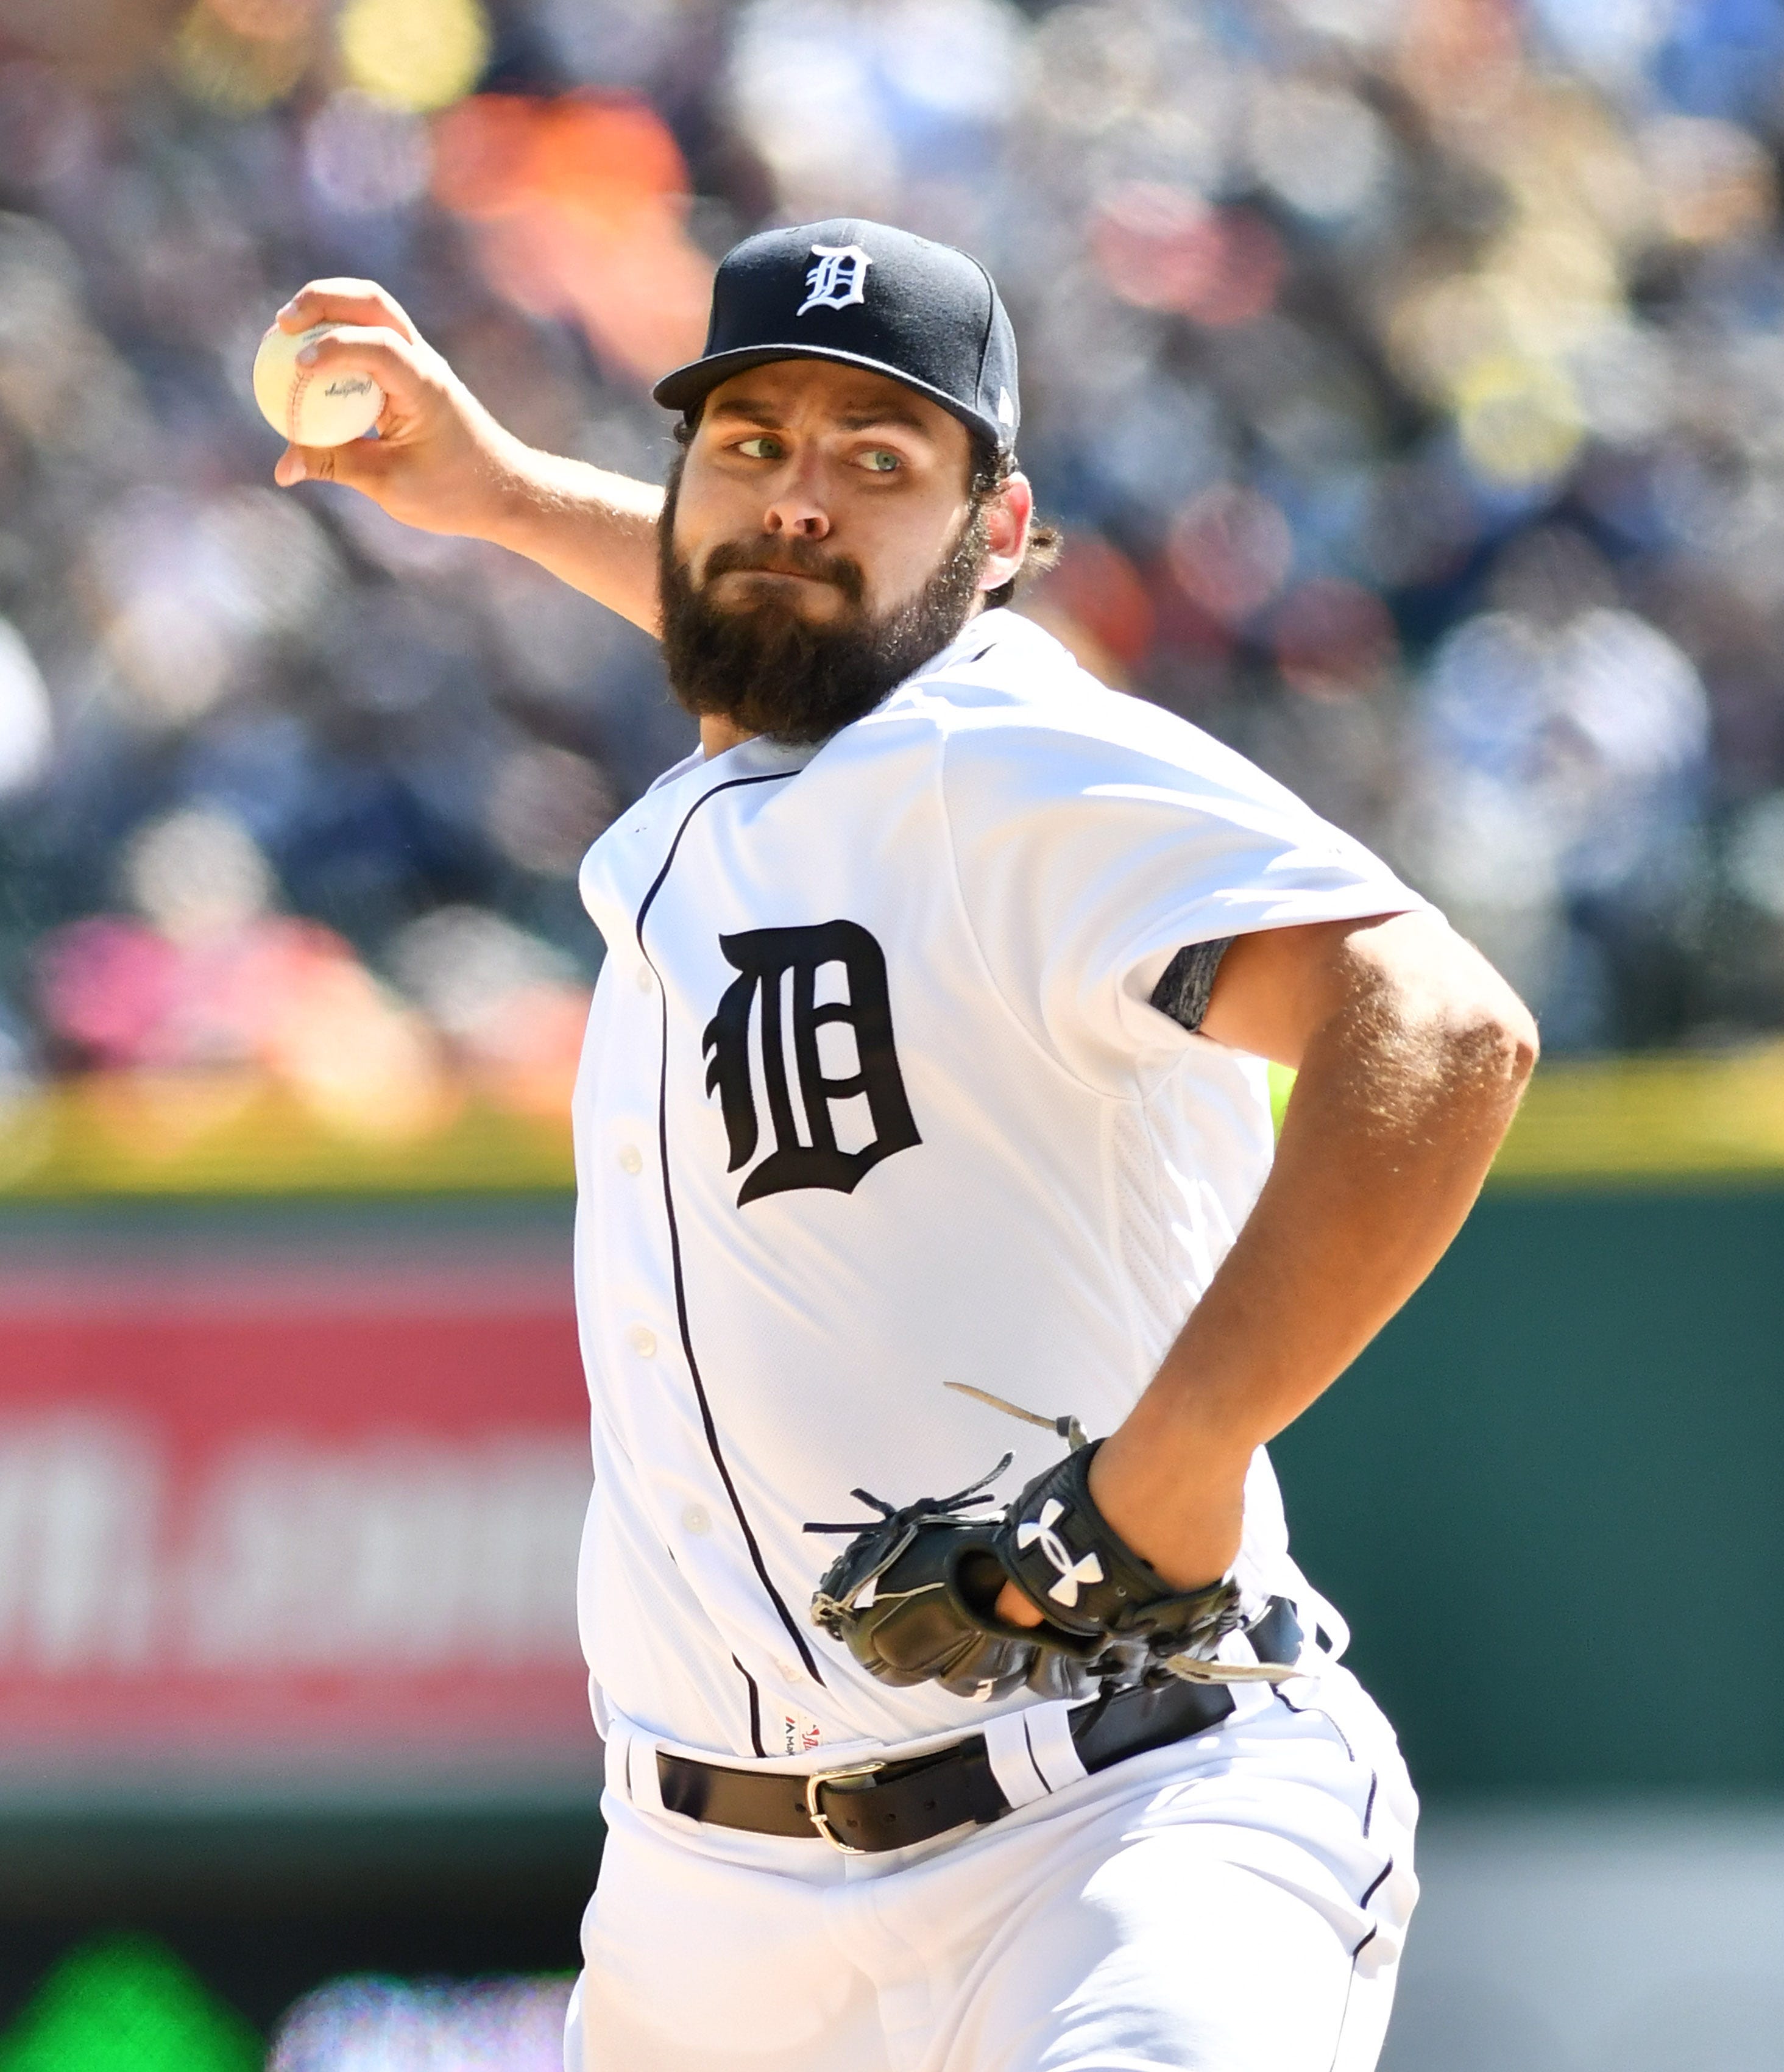 Tigers pitcher Michael Fulmer works in the sixth inning. Detroit Tigers vs Boston Red Sox at Tigers Opening Day at Comerica Park in Detroit on April 7, 2017. Tigers win, 6-5.